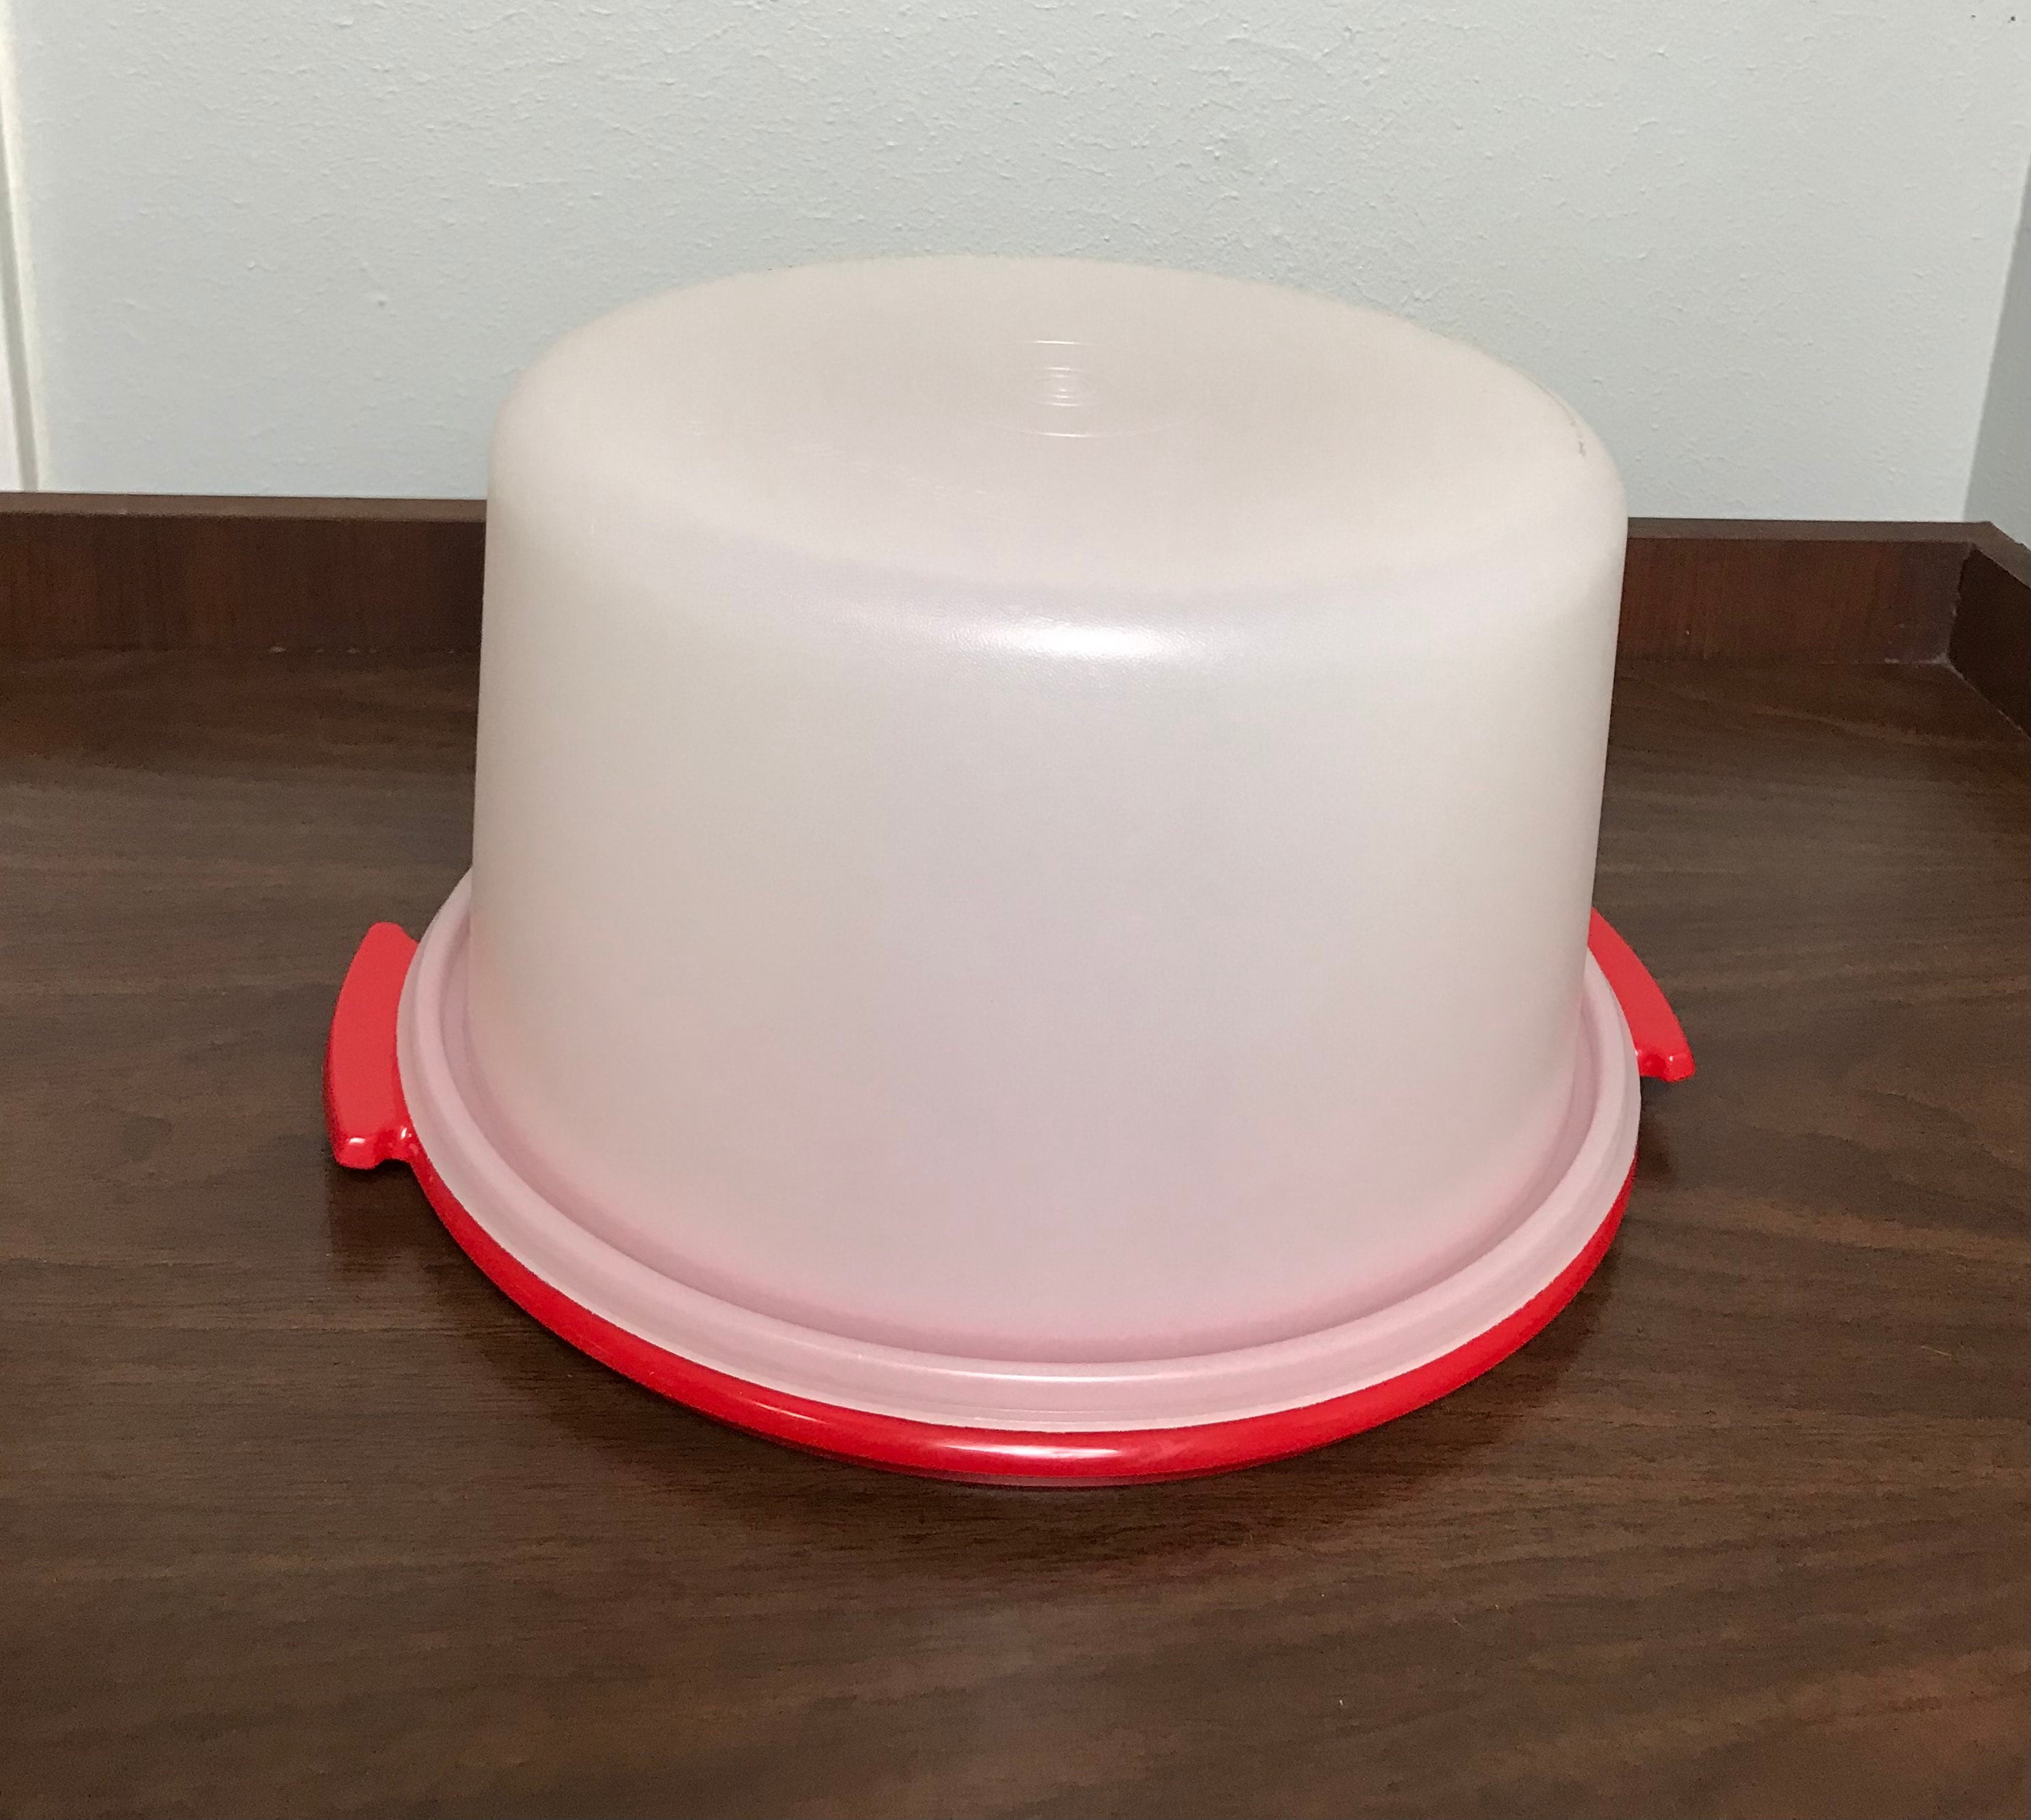 Vintage Plastic Rubbermaid Cake Stand With Lazy Susan Feature, Retro  Rubbermaid Revolving Cake Stand. 